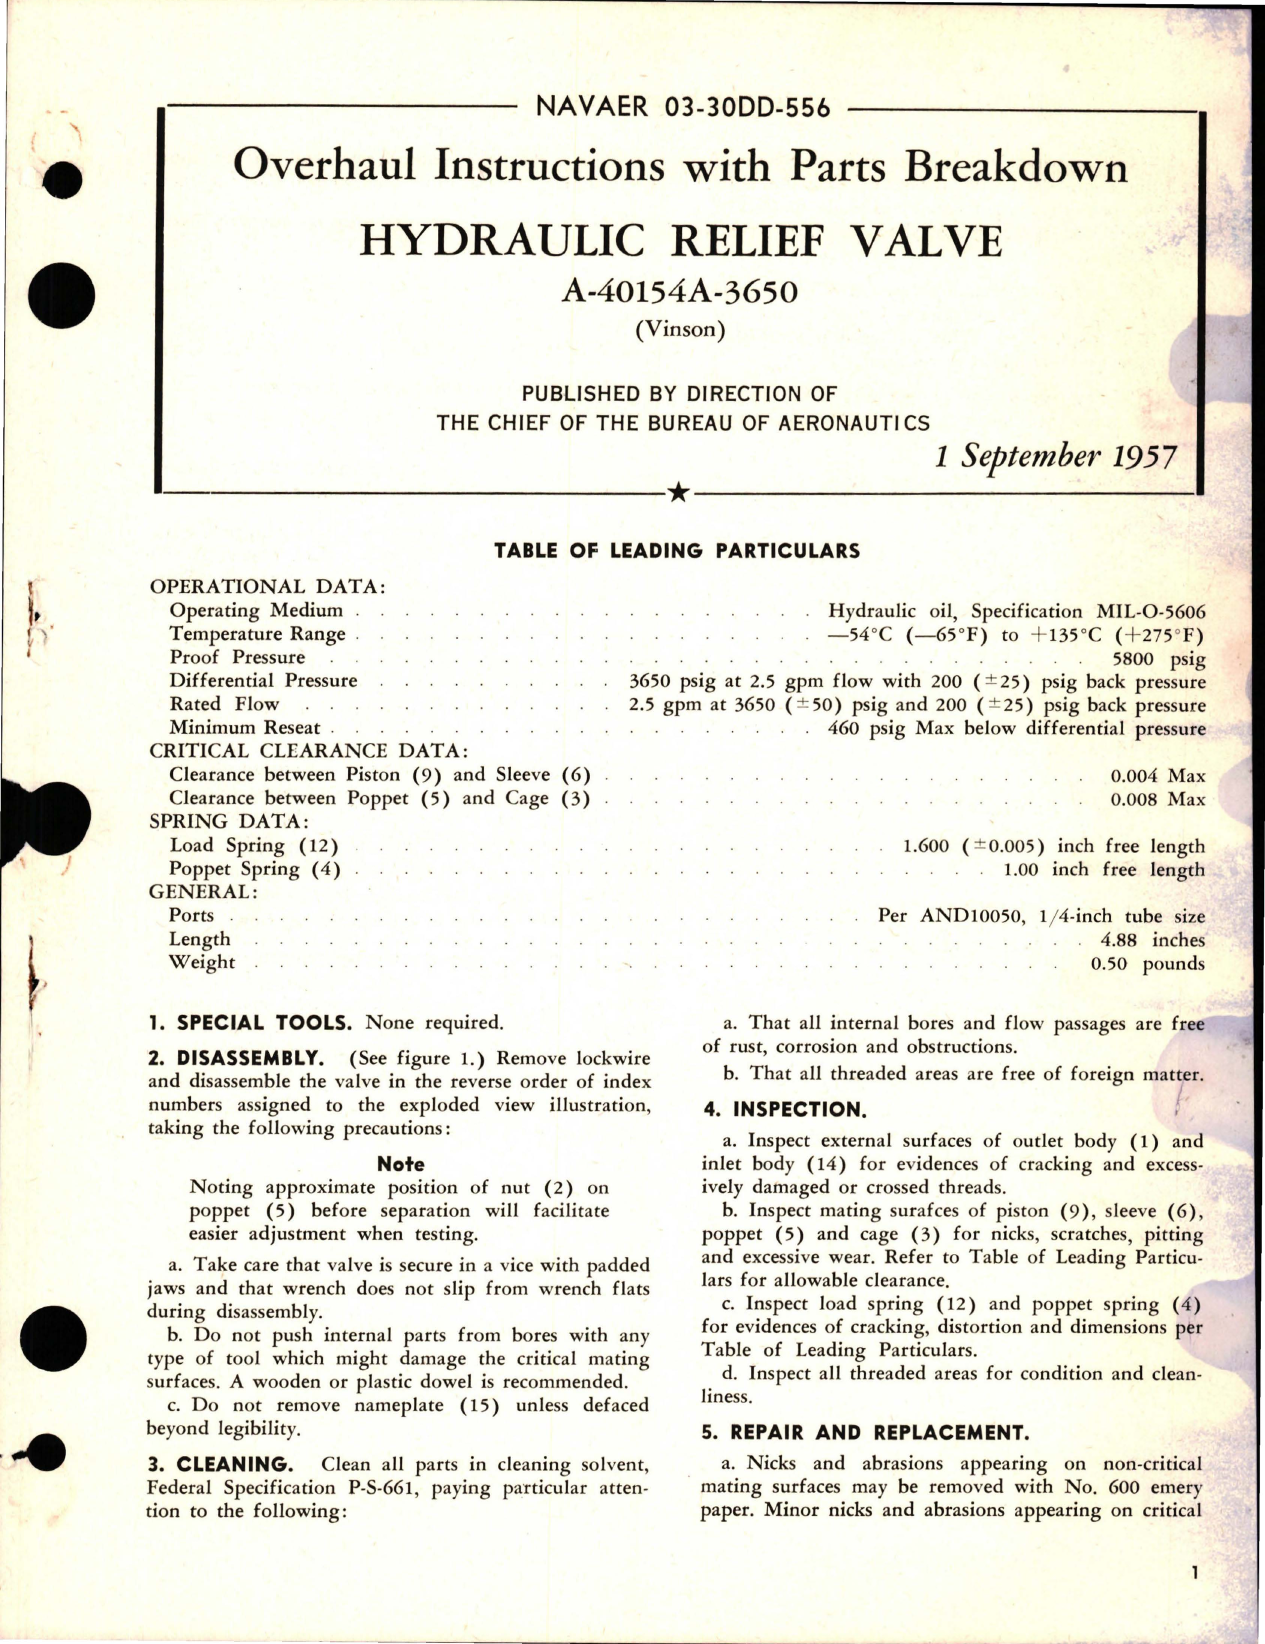 Sample page 1 from AirCorps Library document: Overhaul Instructions with Parts Breakdown for Hydraulic Relief Valve - A-40154A-3650 